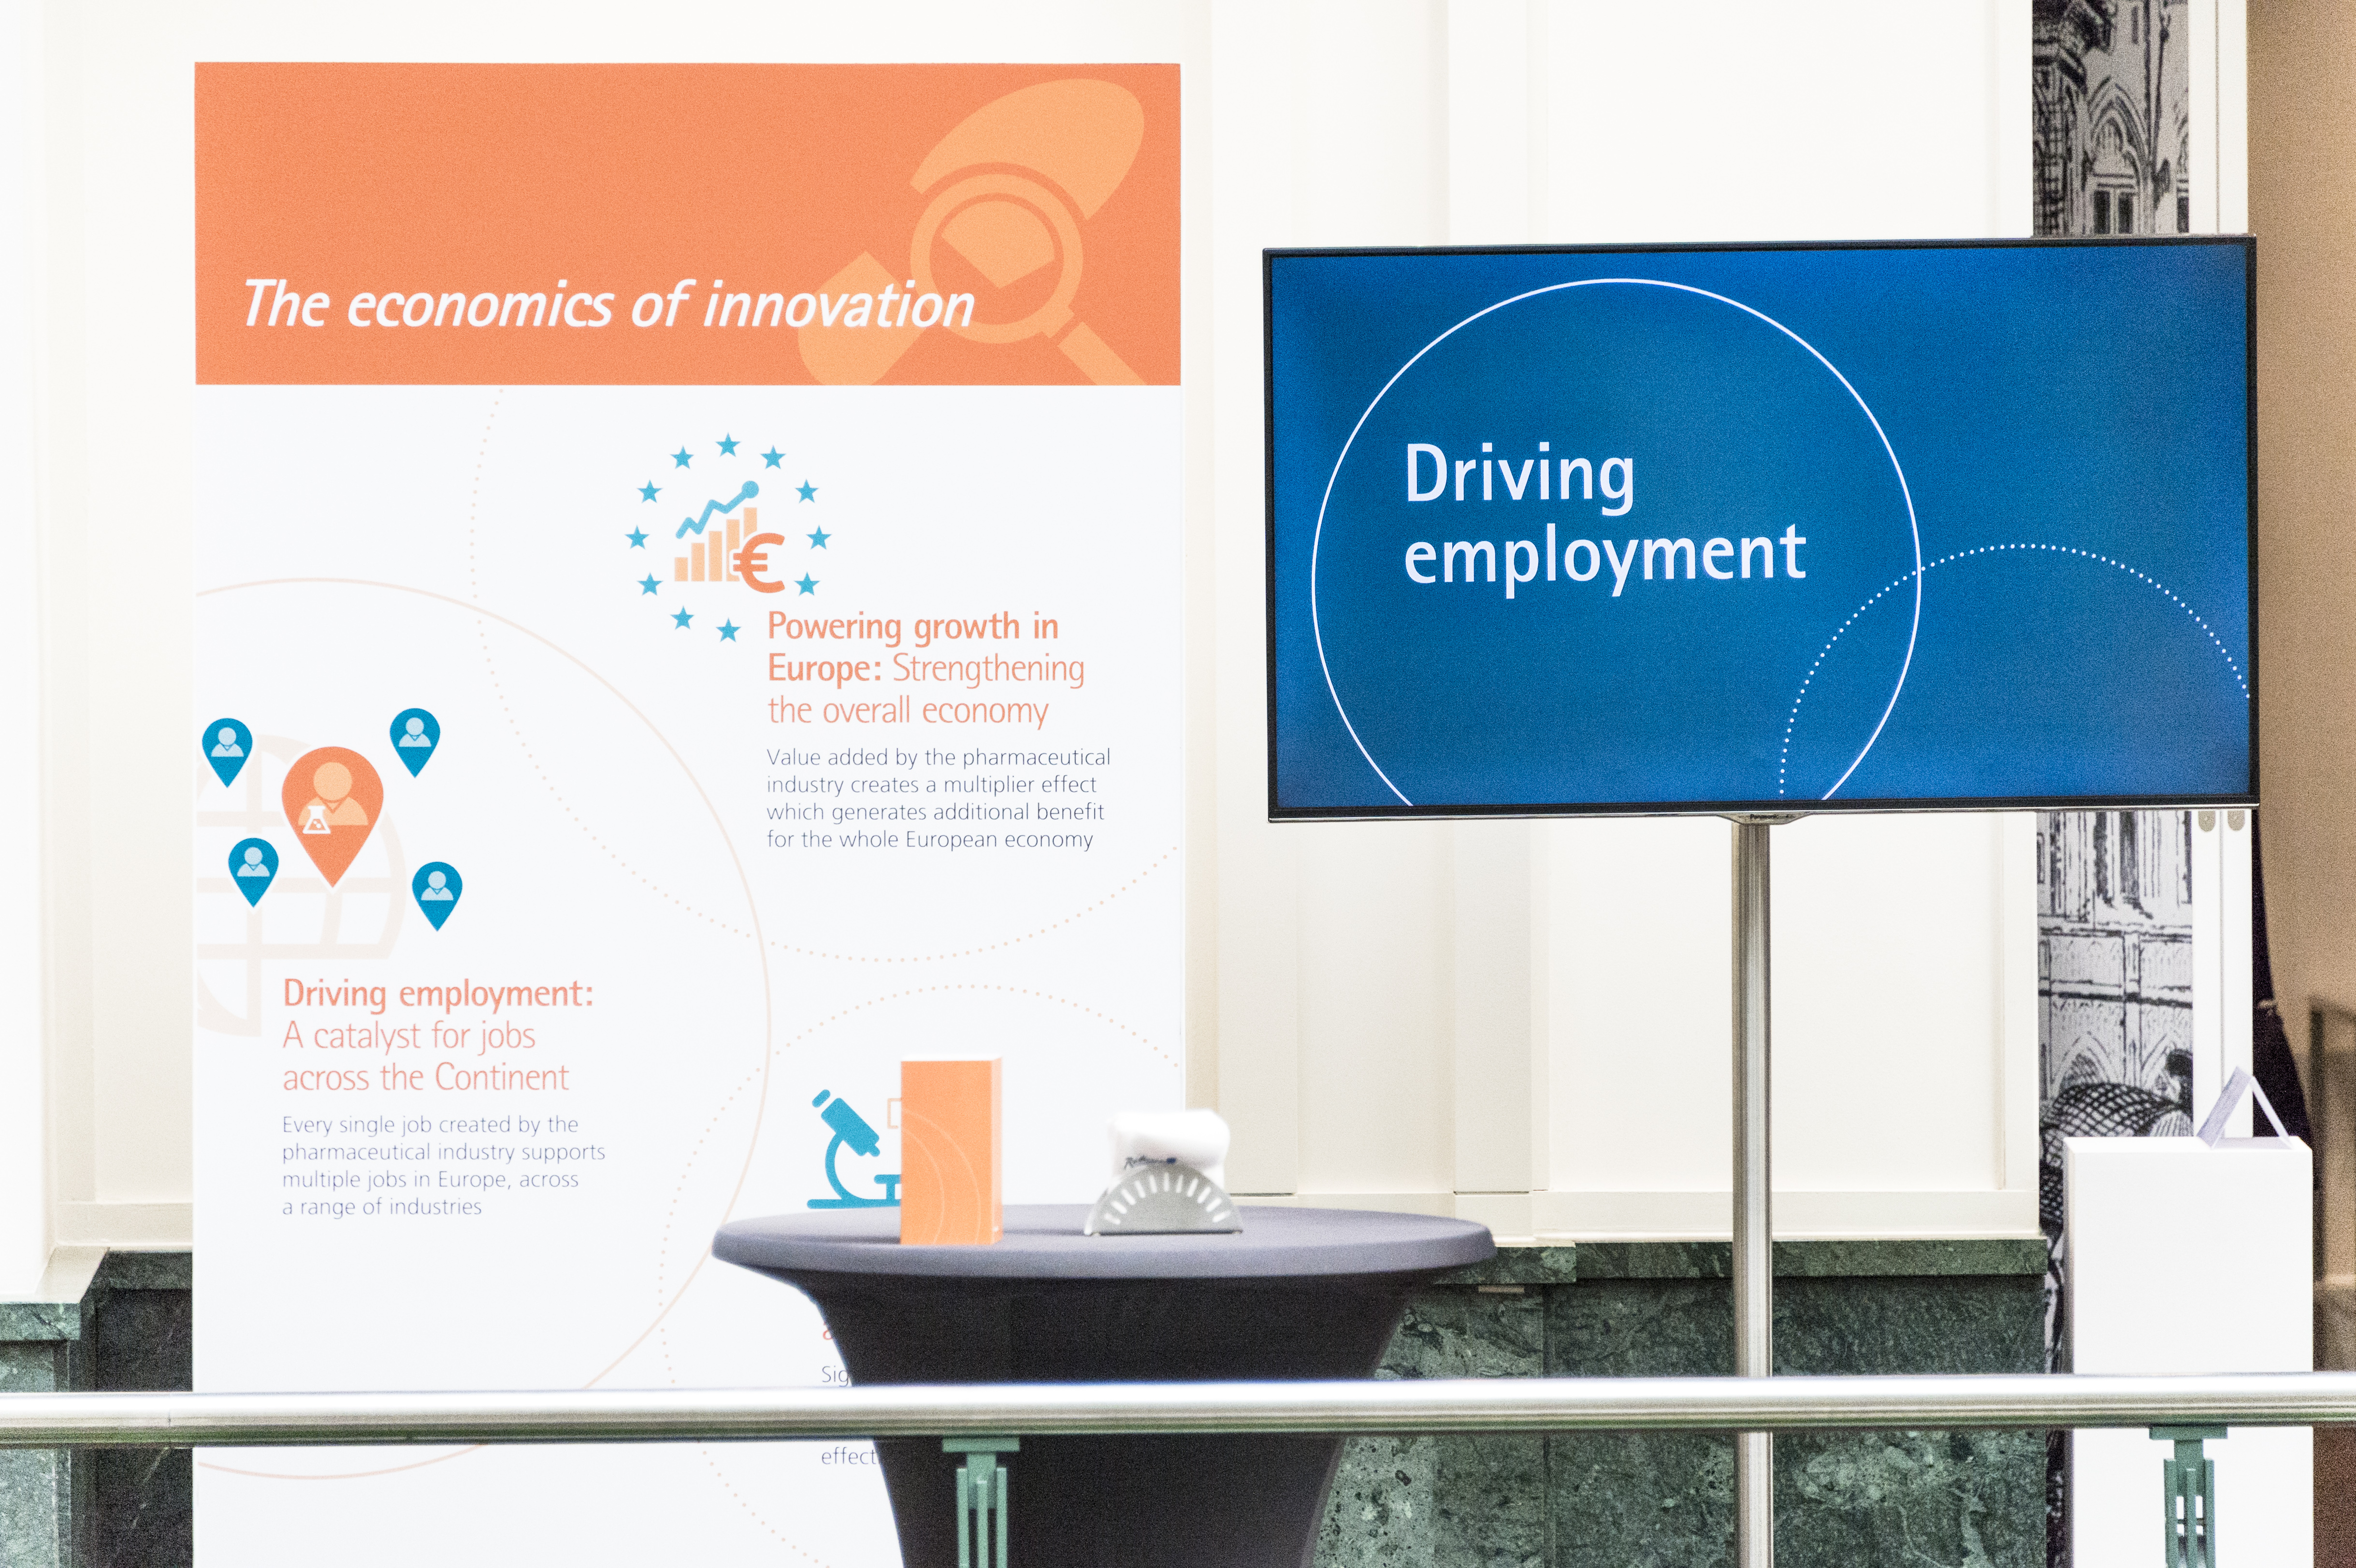 EFPIA Annual Meeting 2016 - the economics of innovation